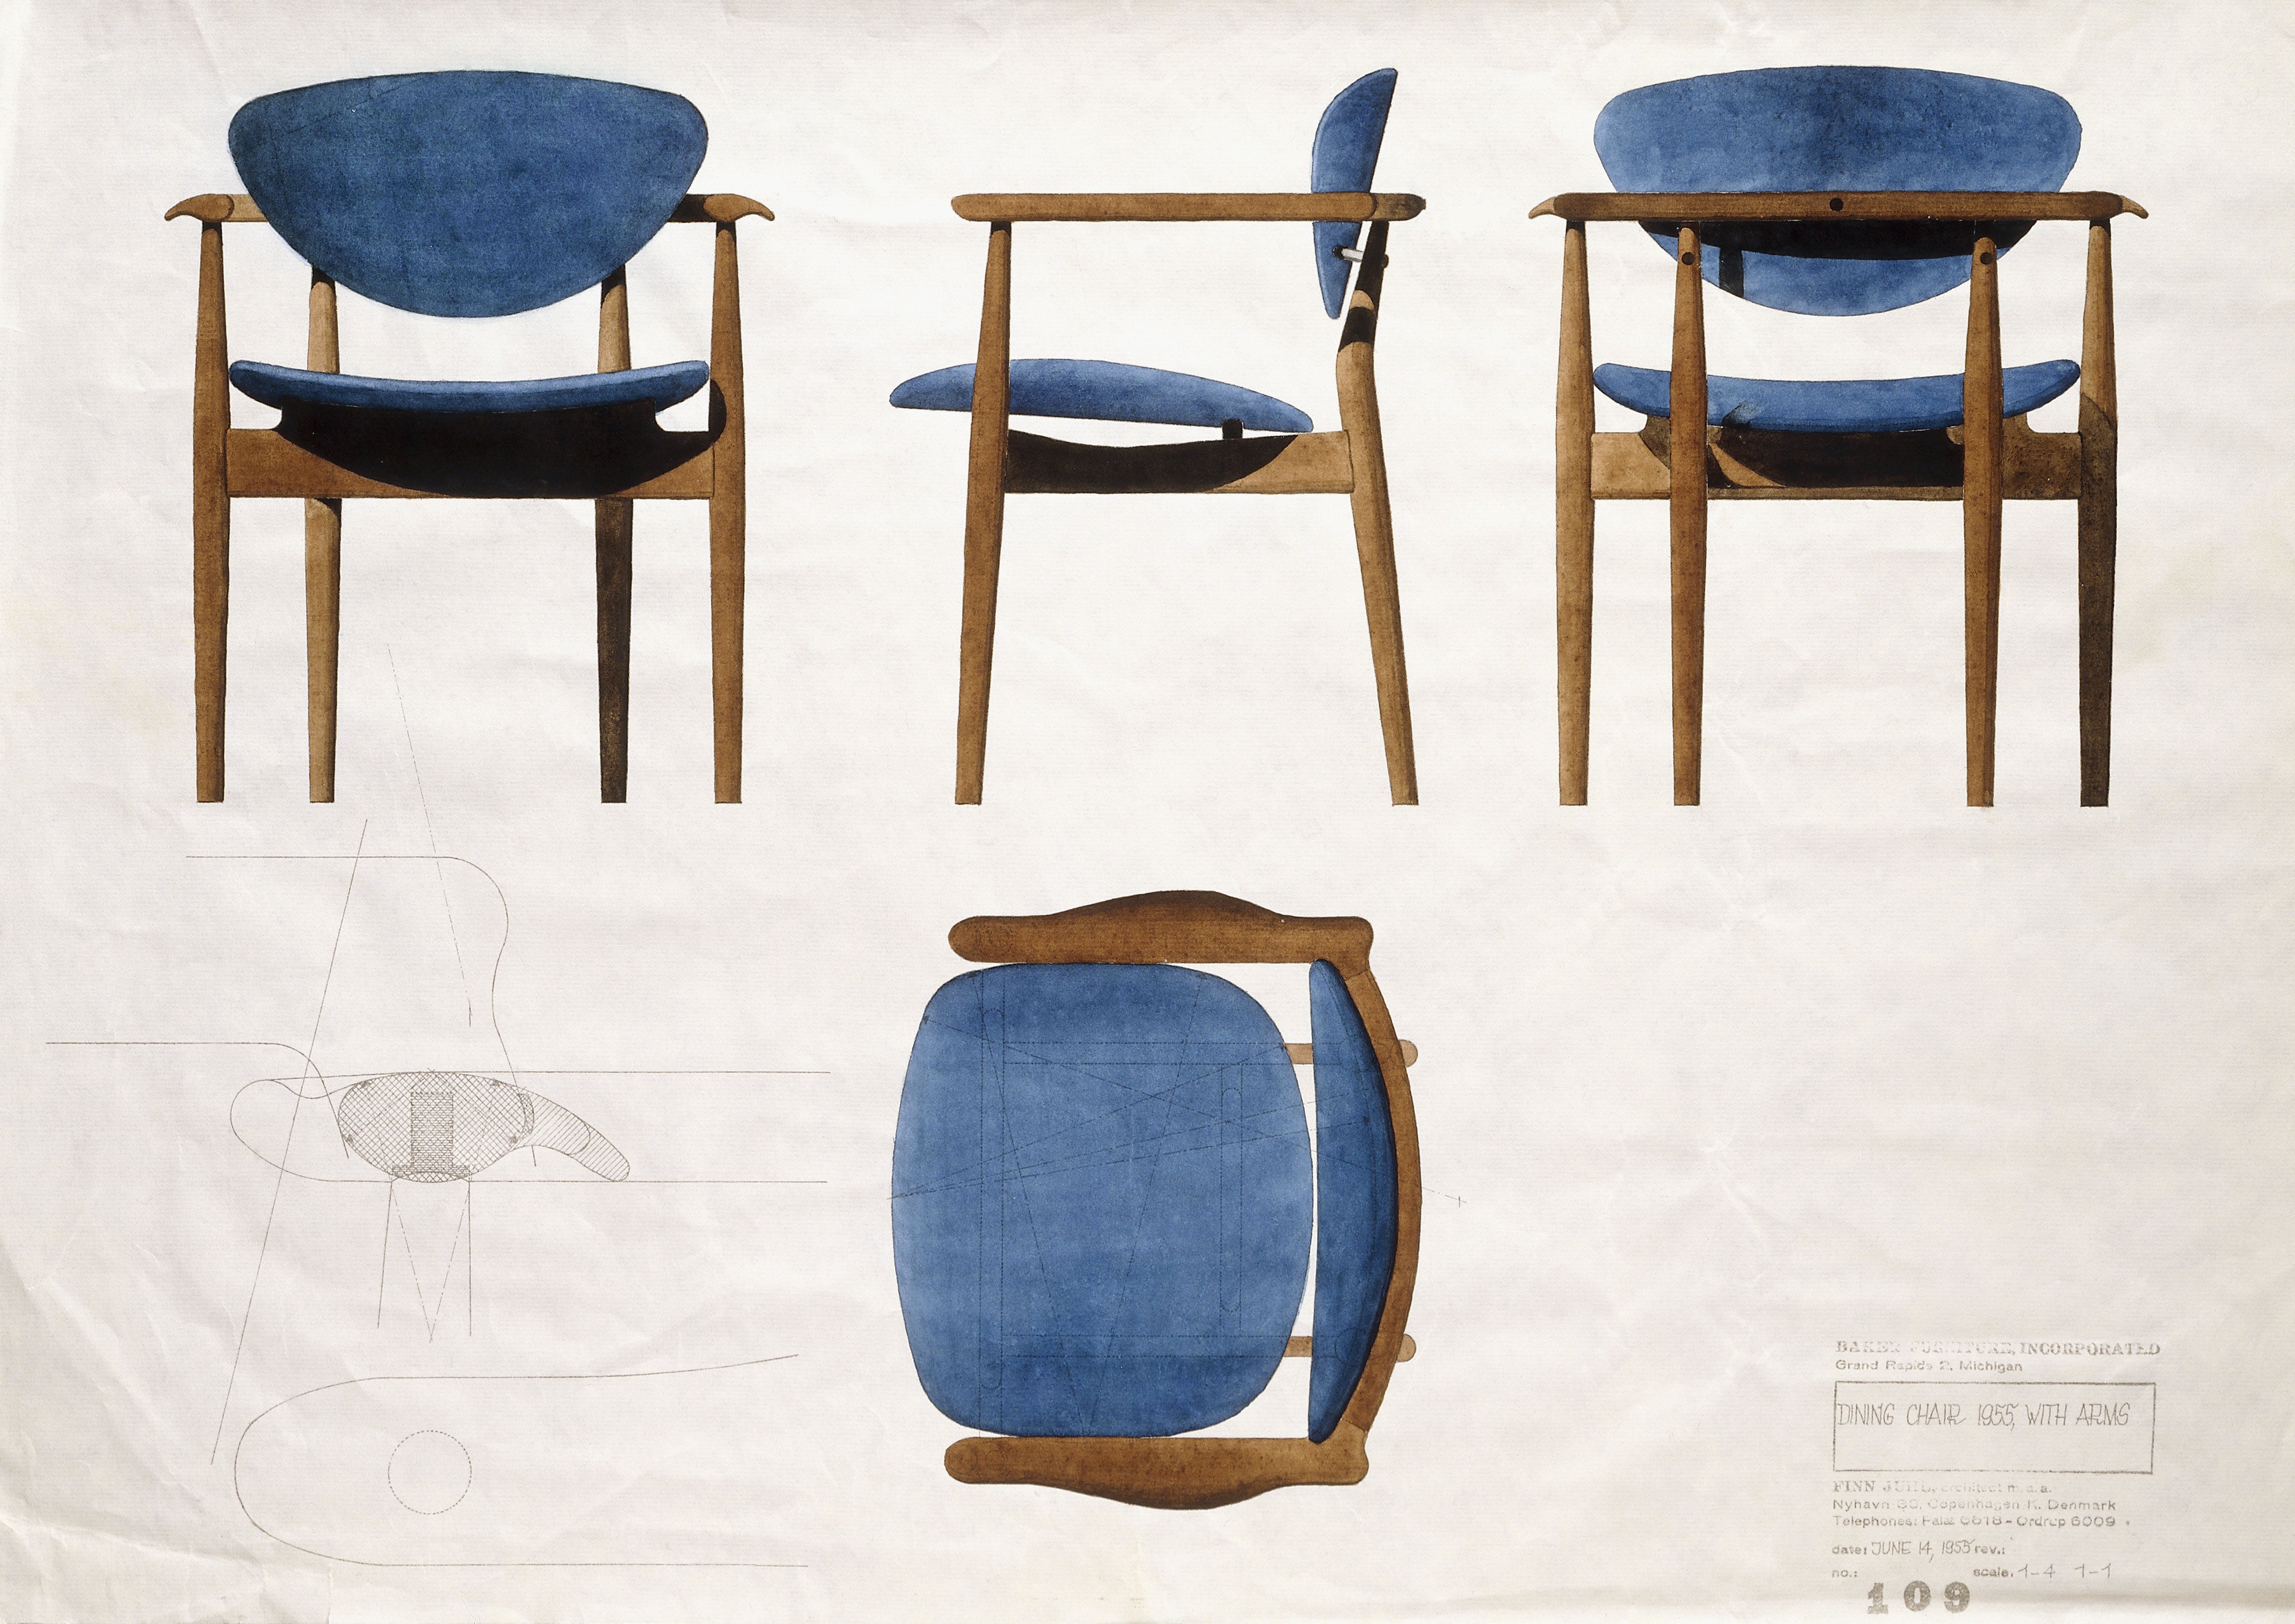 Midcentury Modern Furniture Owes Its Popularity to the Welfare State